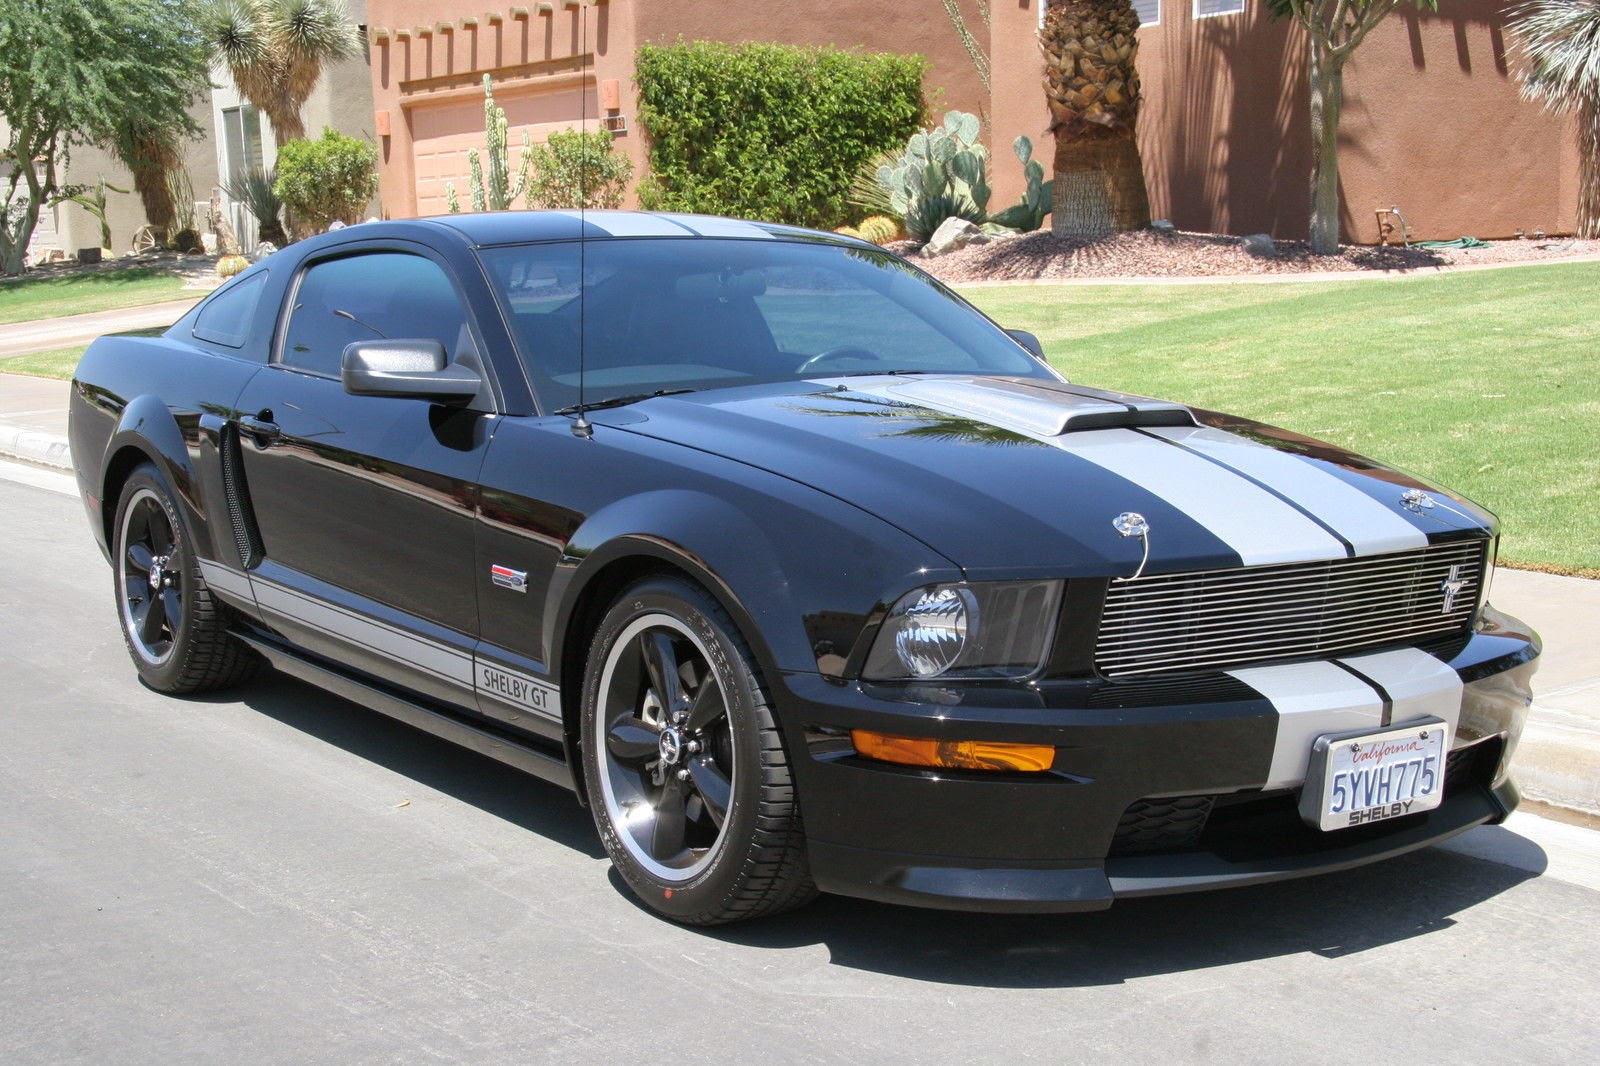 2007 Ford Mustang Shelby GT Black Silver ~ For Sale American Muscle Cars